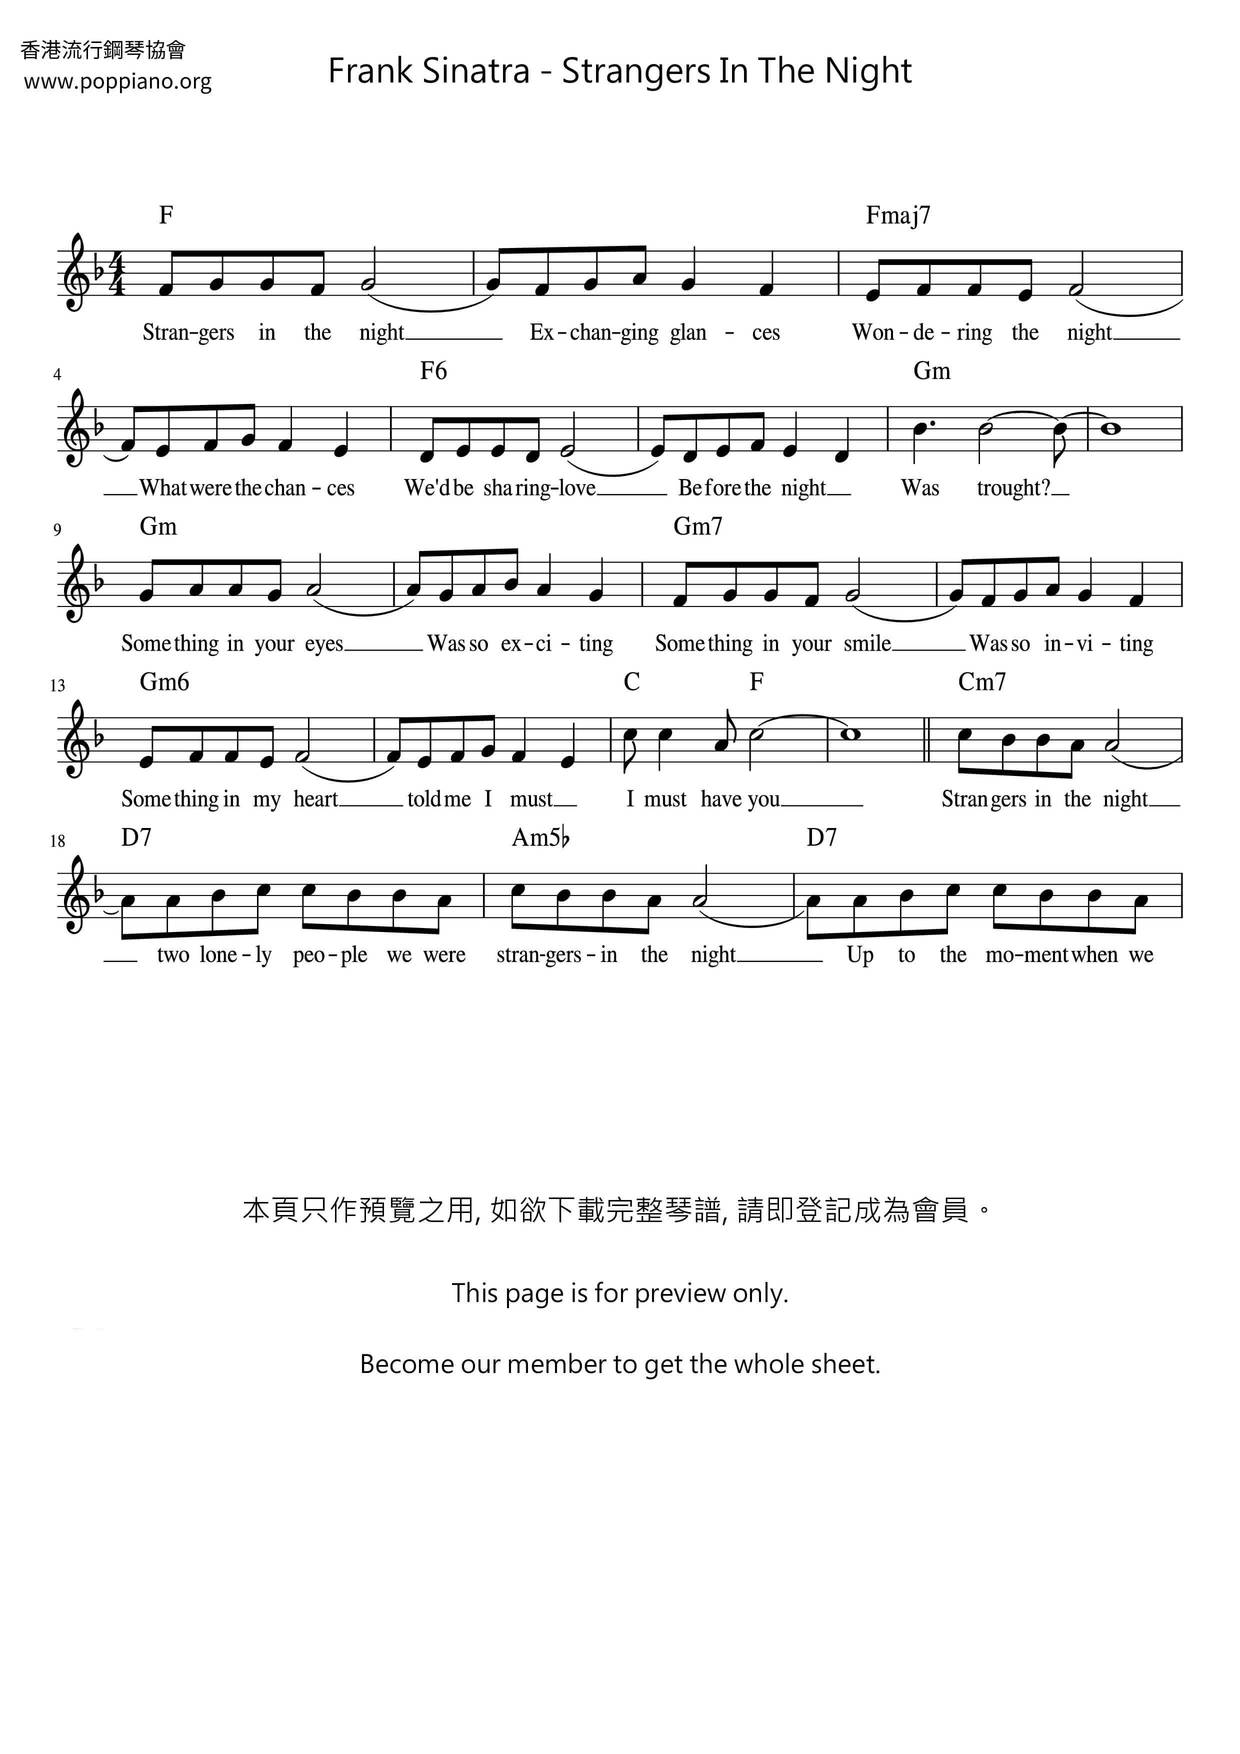 STRANGERS IN THE NIGHT Easy Piano Sheet music